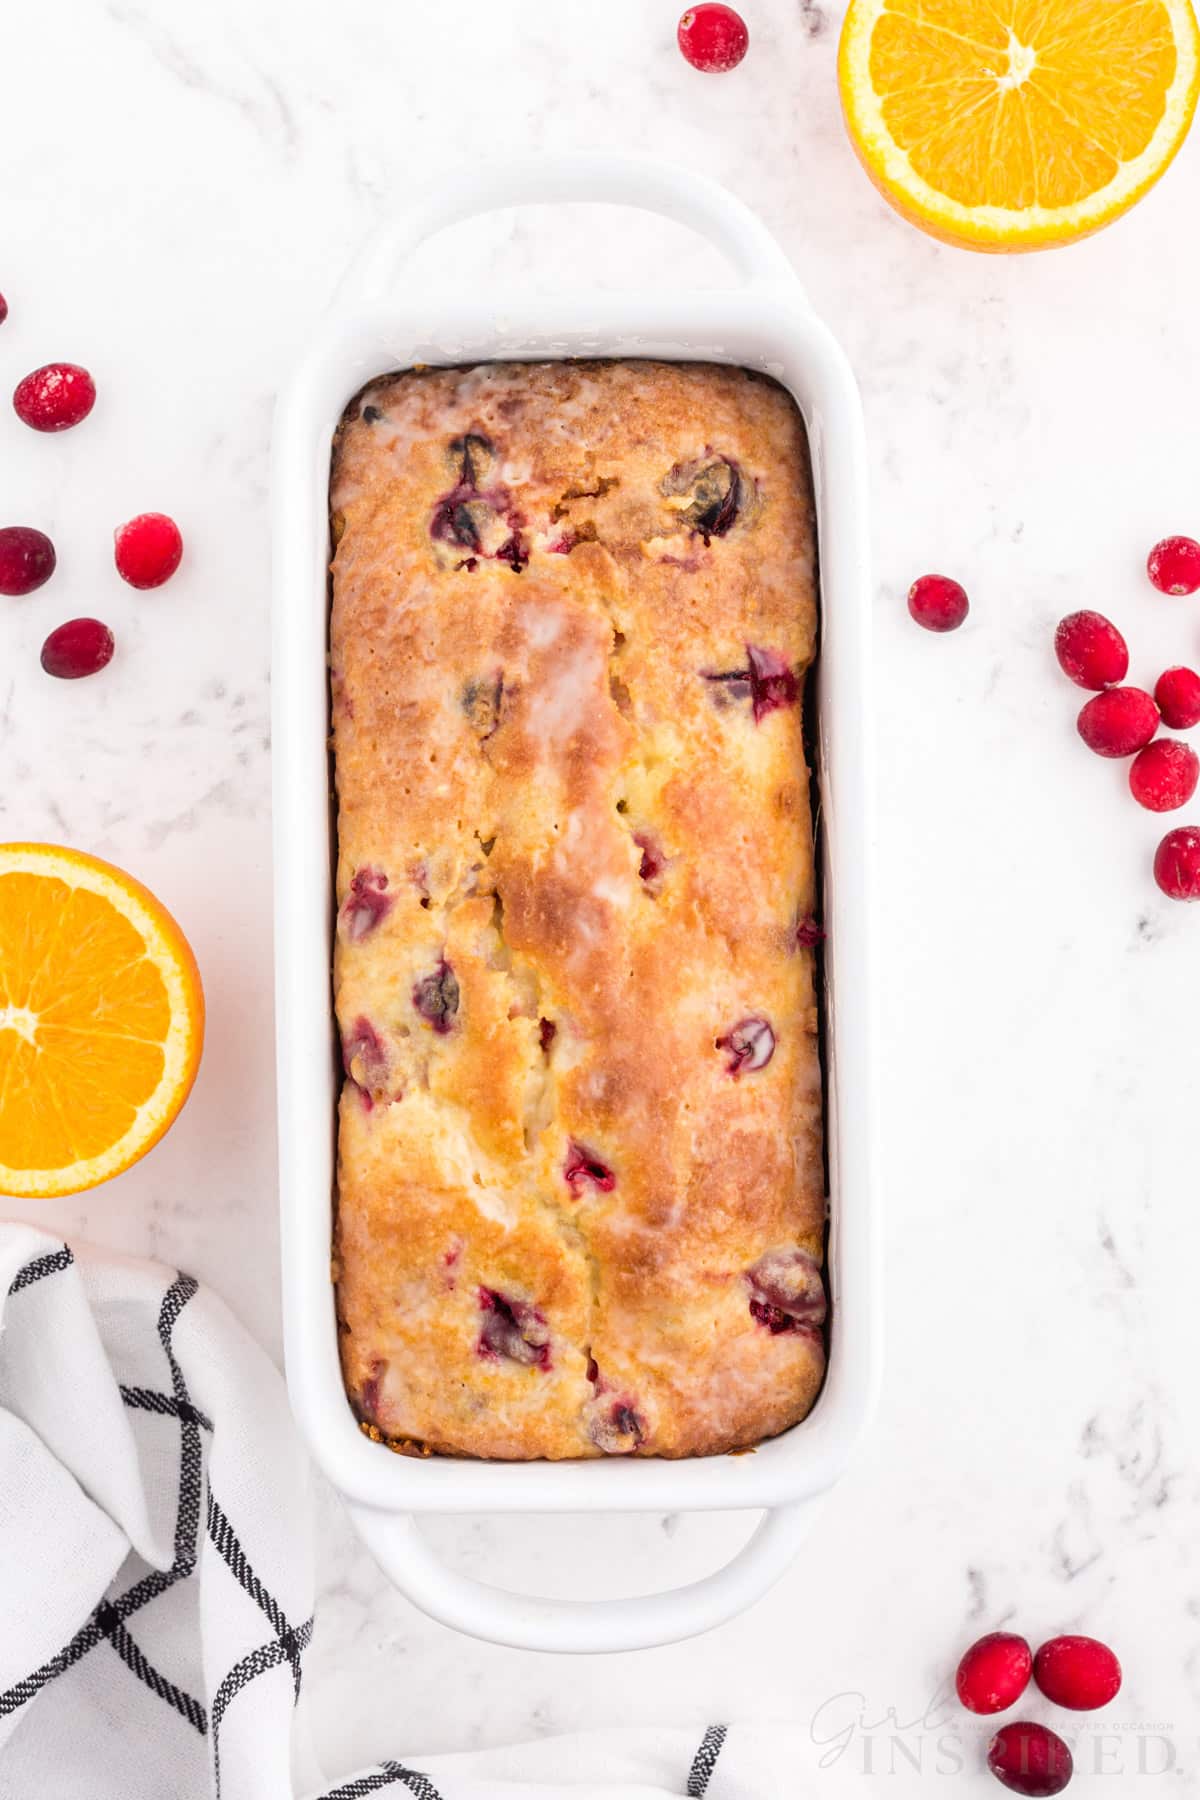 Baked Orange Cranberry Bread in white loaf pan, checked linen, sliced fresh oranges, fresh whole cranberries on a white marble countertop.